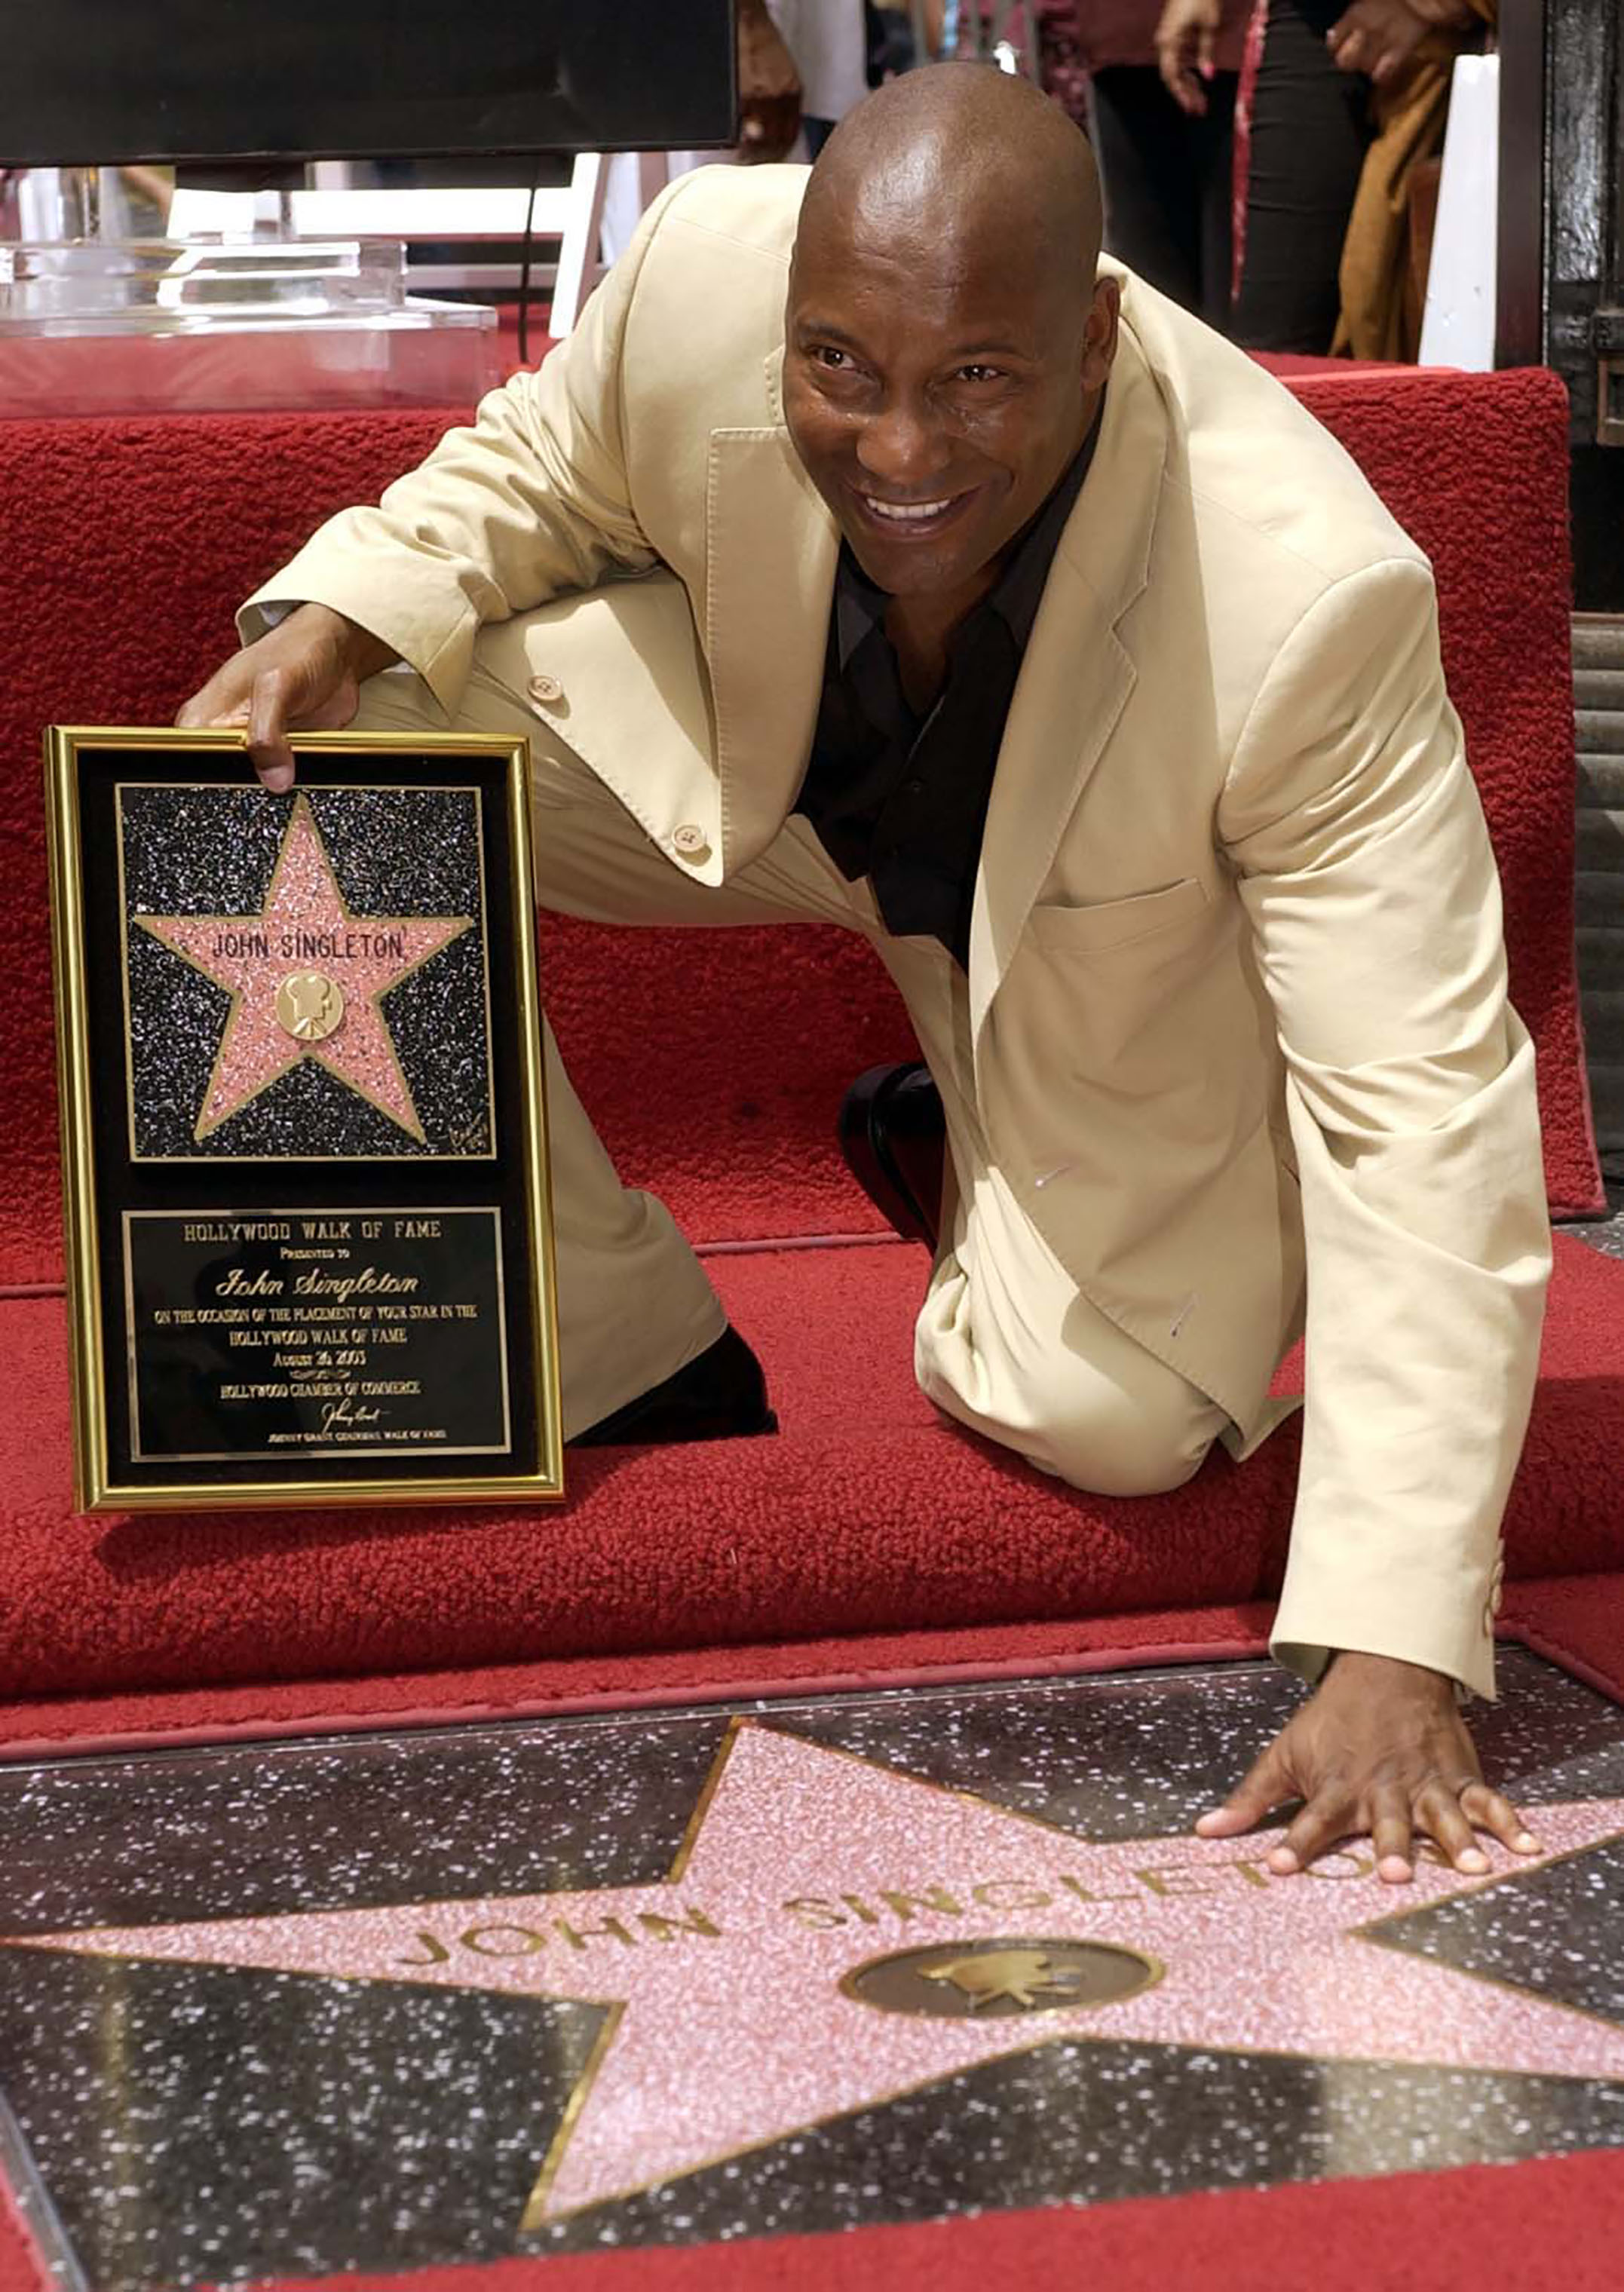 Director John Singleton touches his new star on the Hollywood Walk of Fame in Los Angeles, Tuesday, Aug. 26, 2003. (Nick Ut—AP)